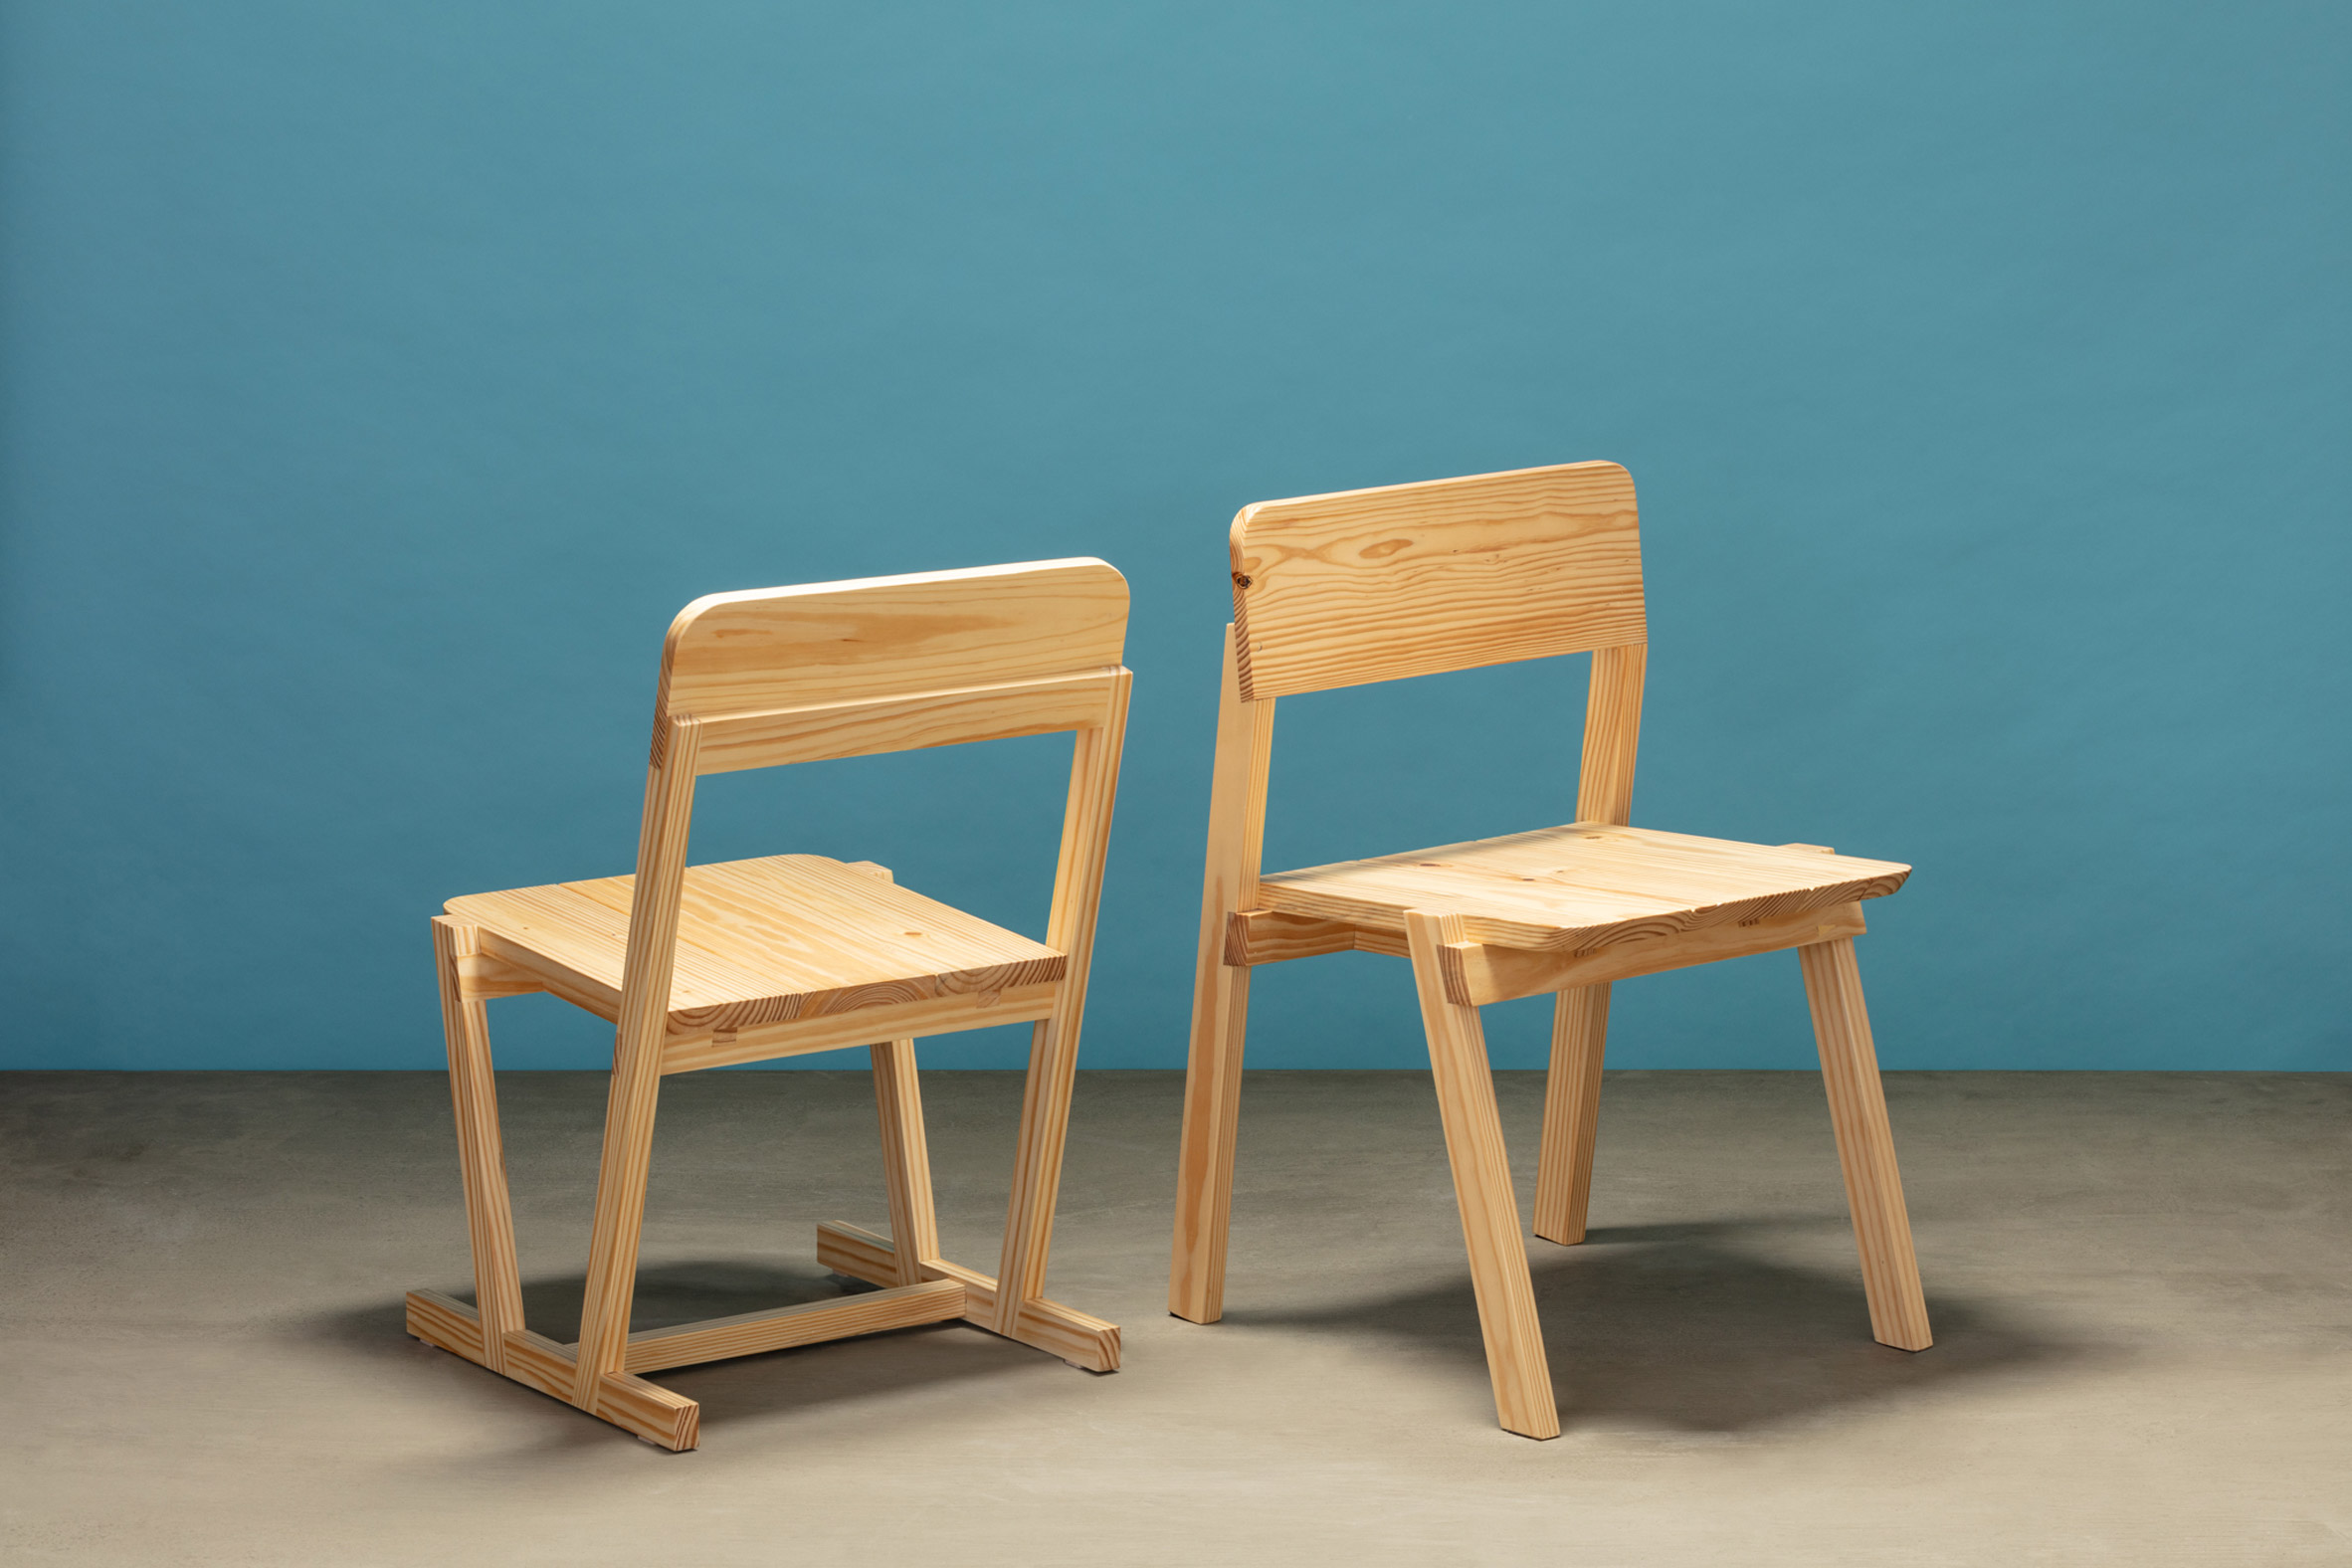 Two dining chairs from Jorge Diego Etienne's Tempo collection for Techo